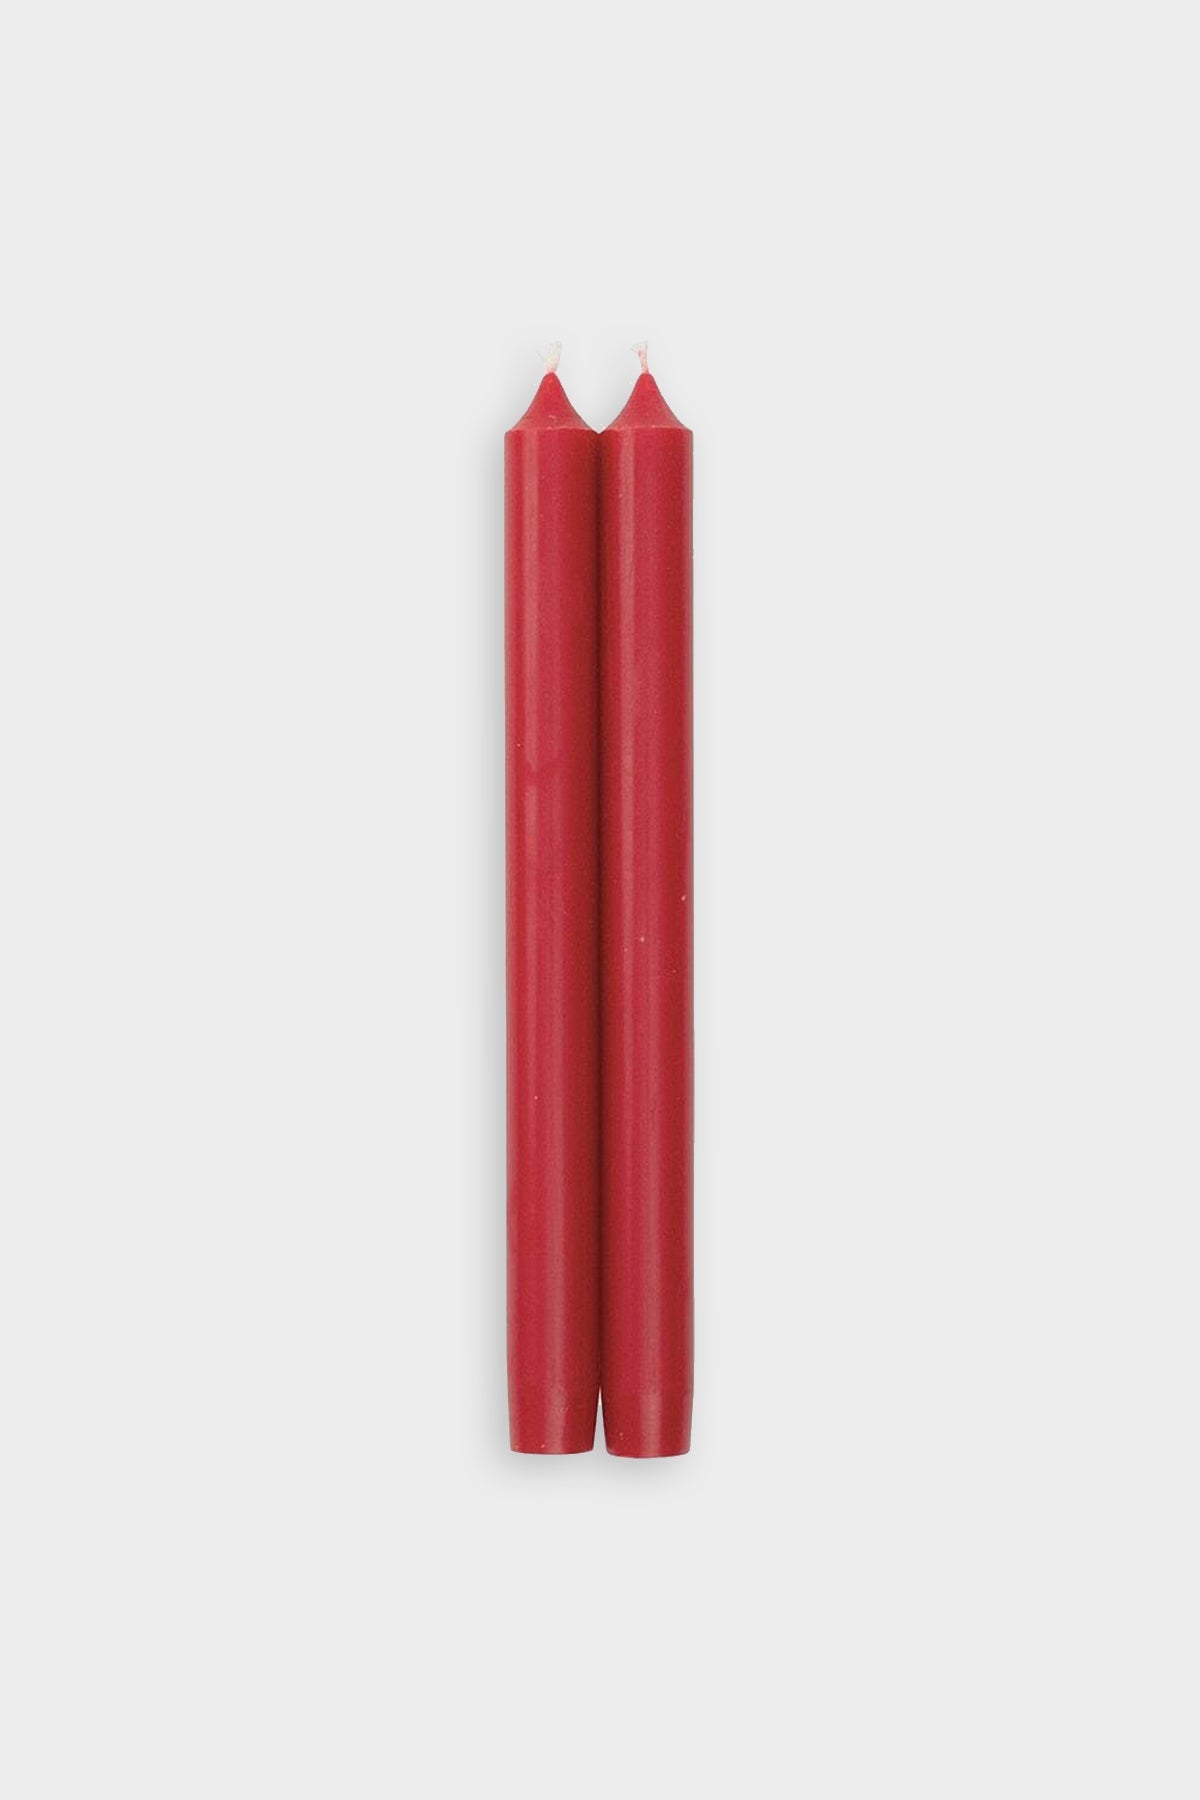 Straight Taper 12" Candles in Red - 2 Candles Per Package - shop-olivia.com